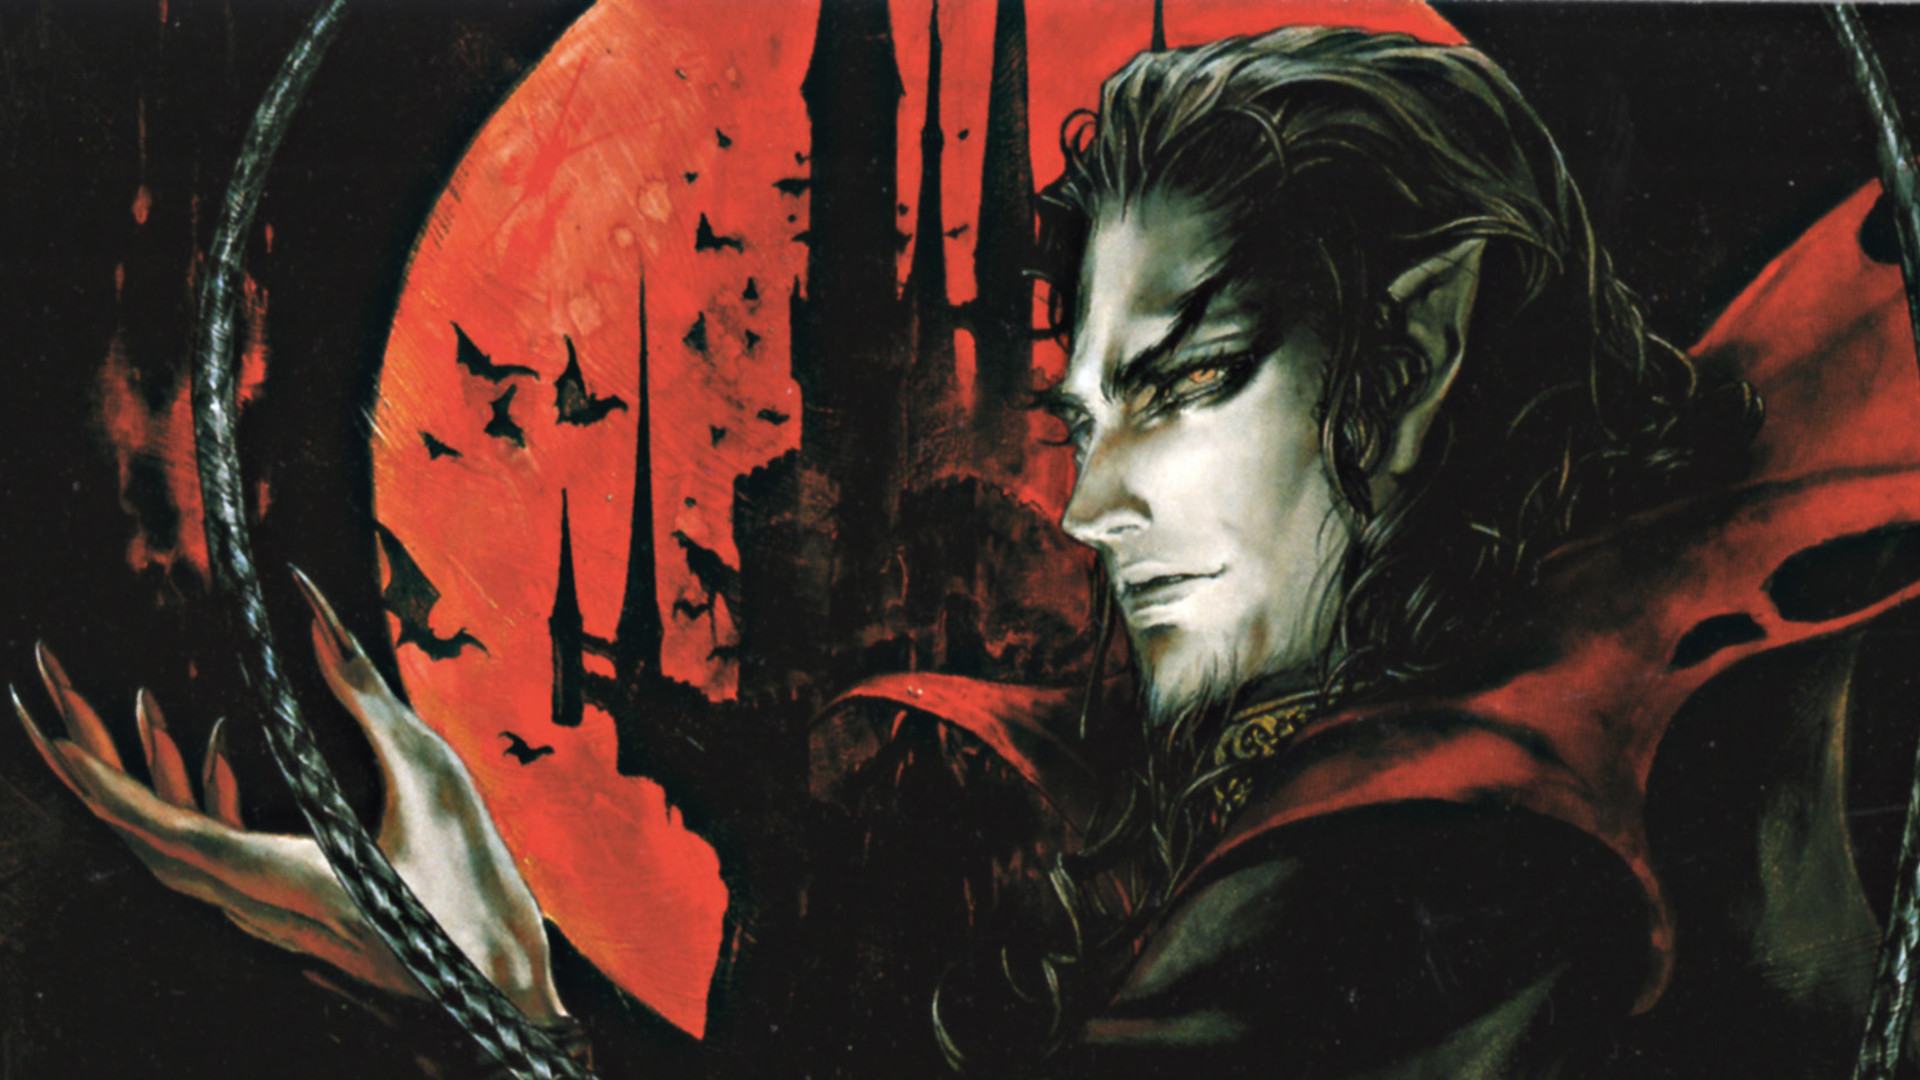 Download Castlevania Chronicles wallpaper for mobile phone, free Castlevania Chronicles HD picture